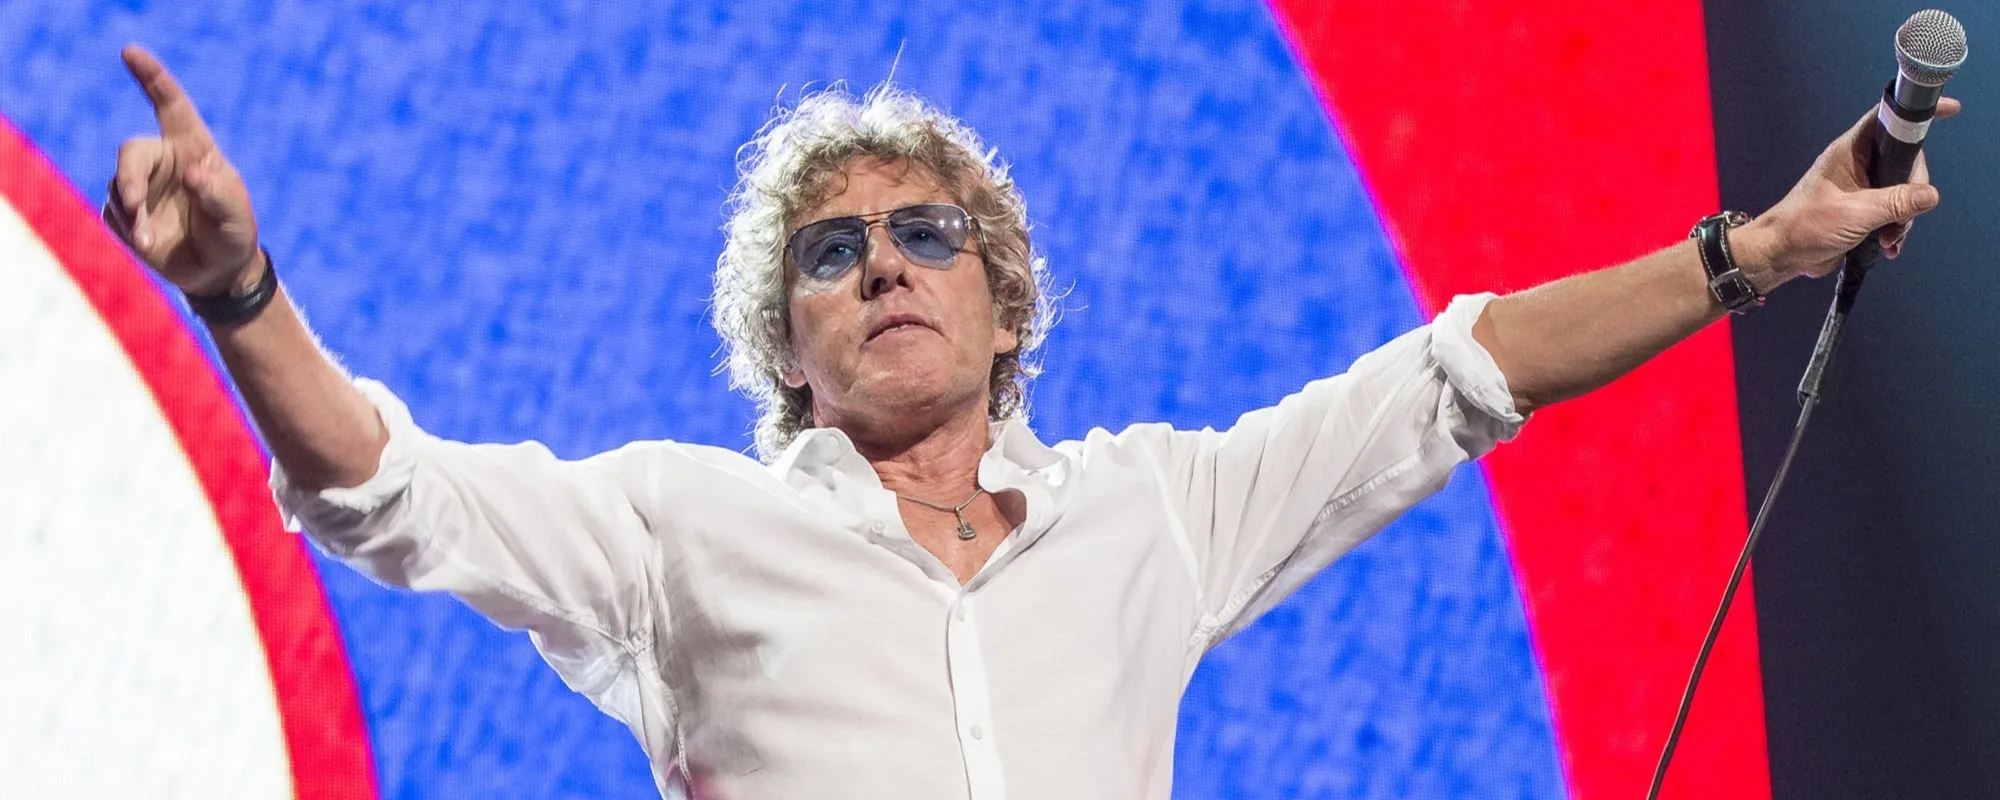 5 Roger Daltrey Solo Highlights in Honor of The Who Frontman